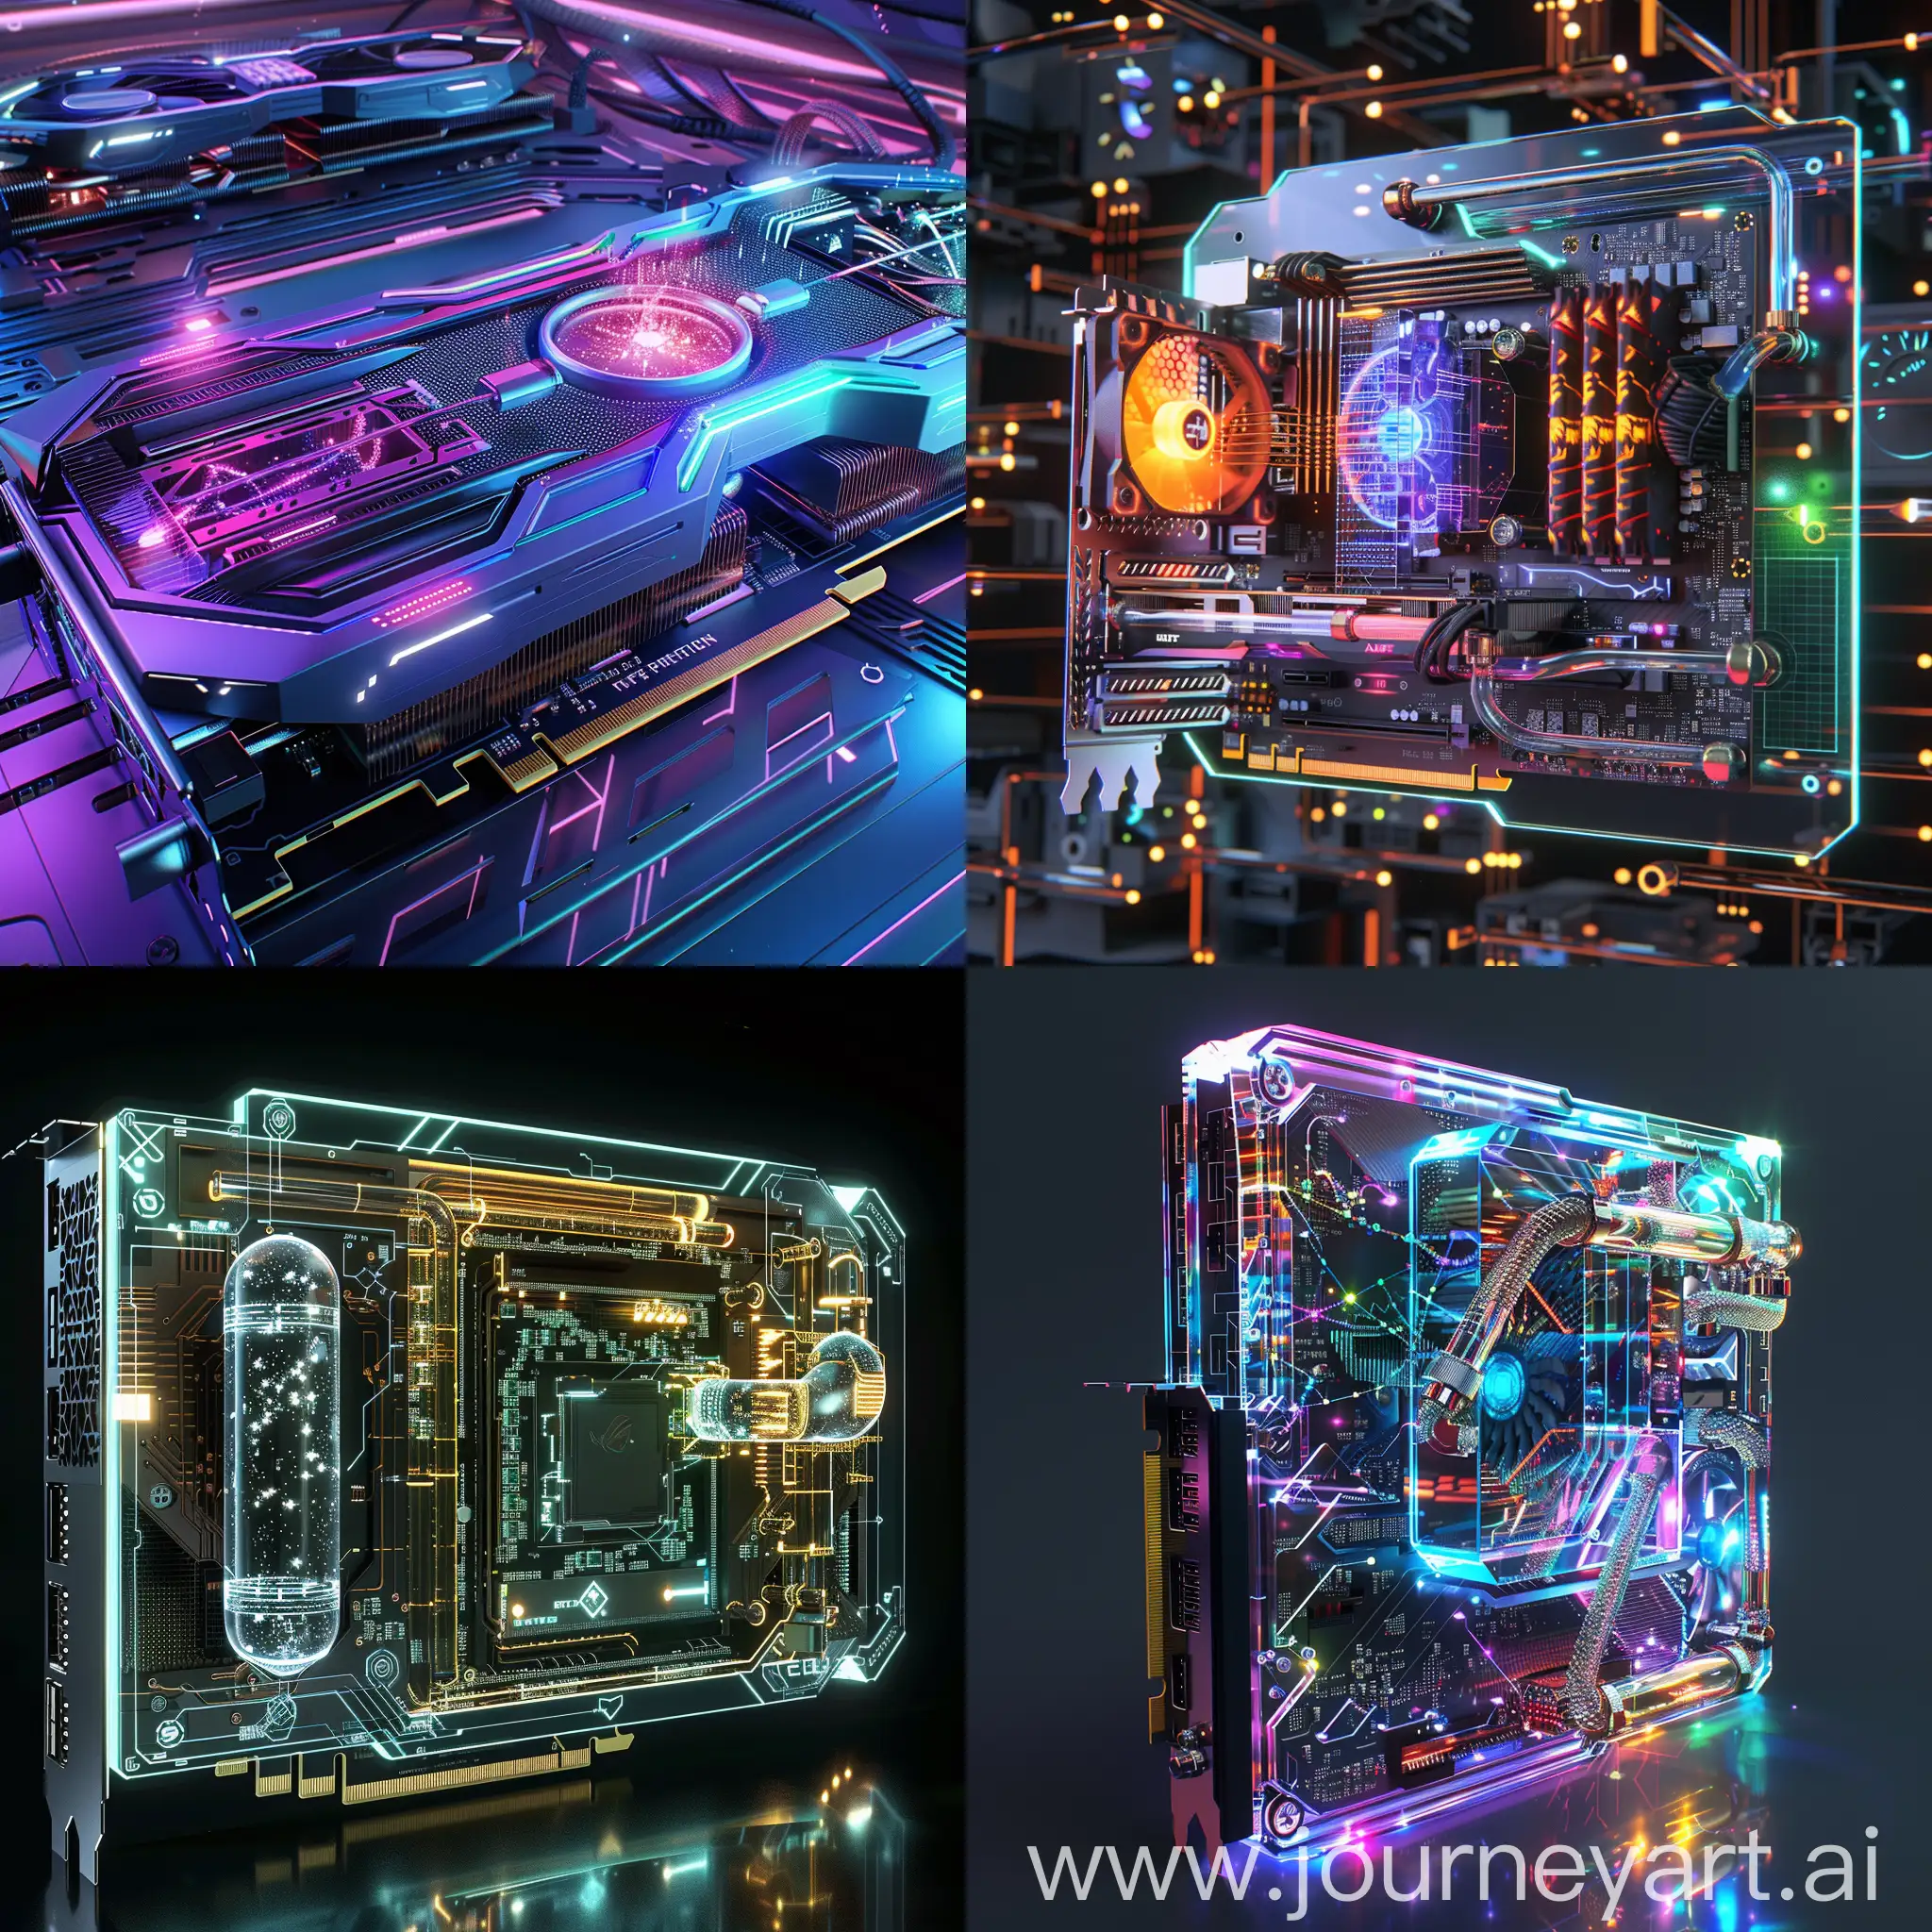 Futuristic-HighTech-PC-Graphics-Card-with-Quantum-Computing-Cores-and-Holographic-Display-Support